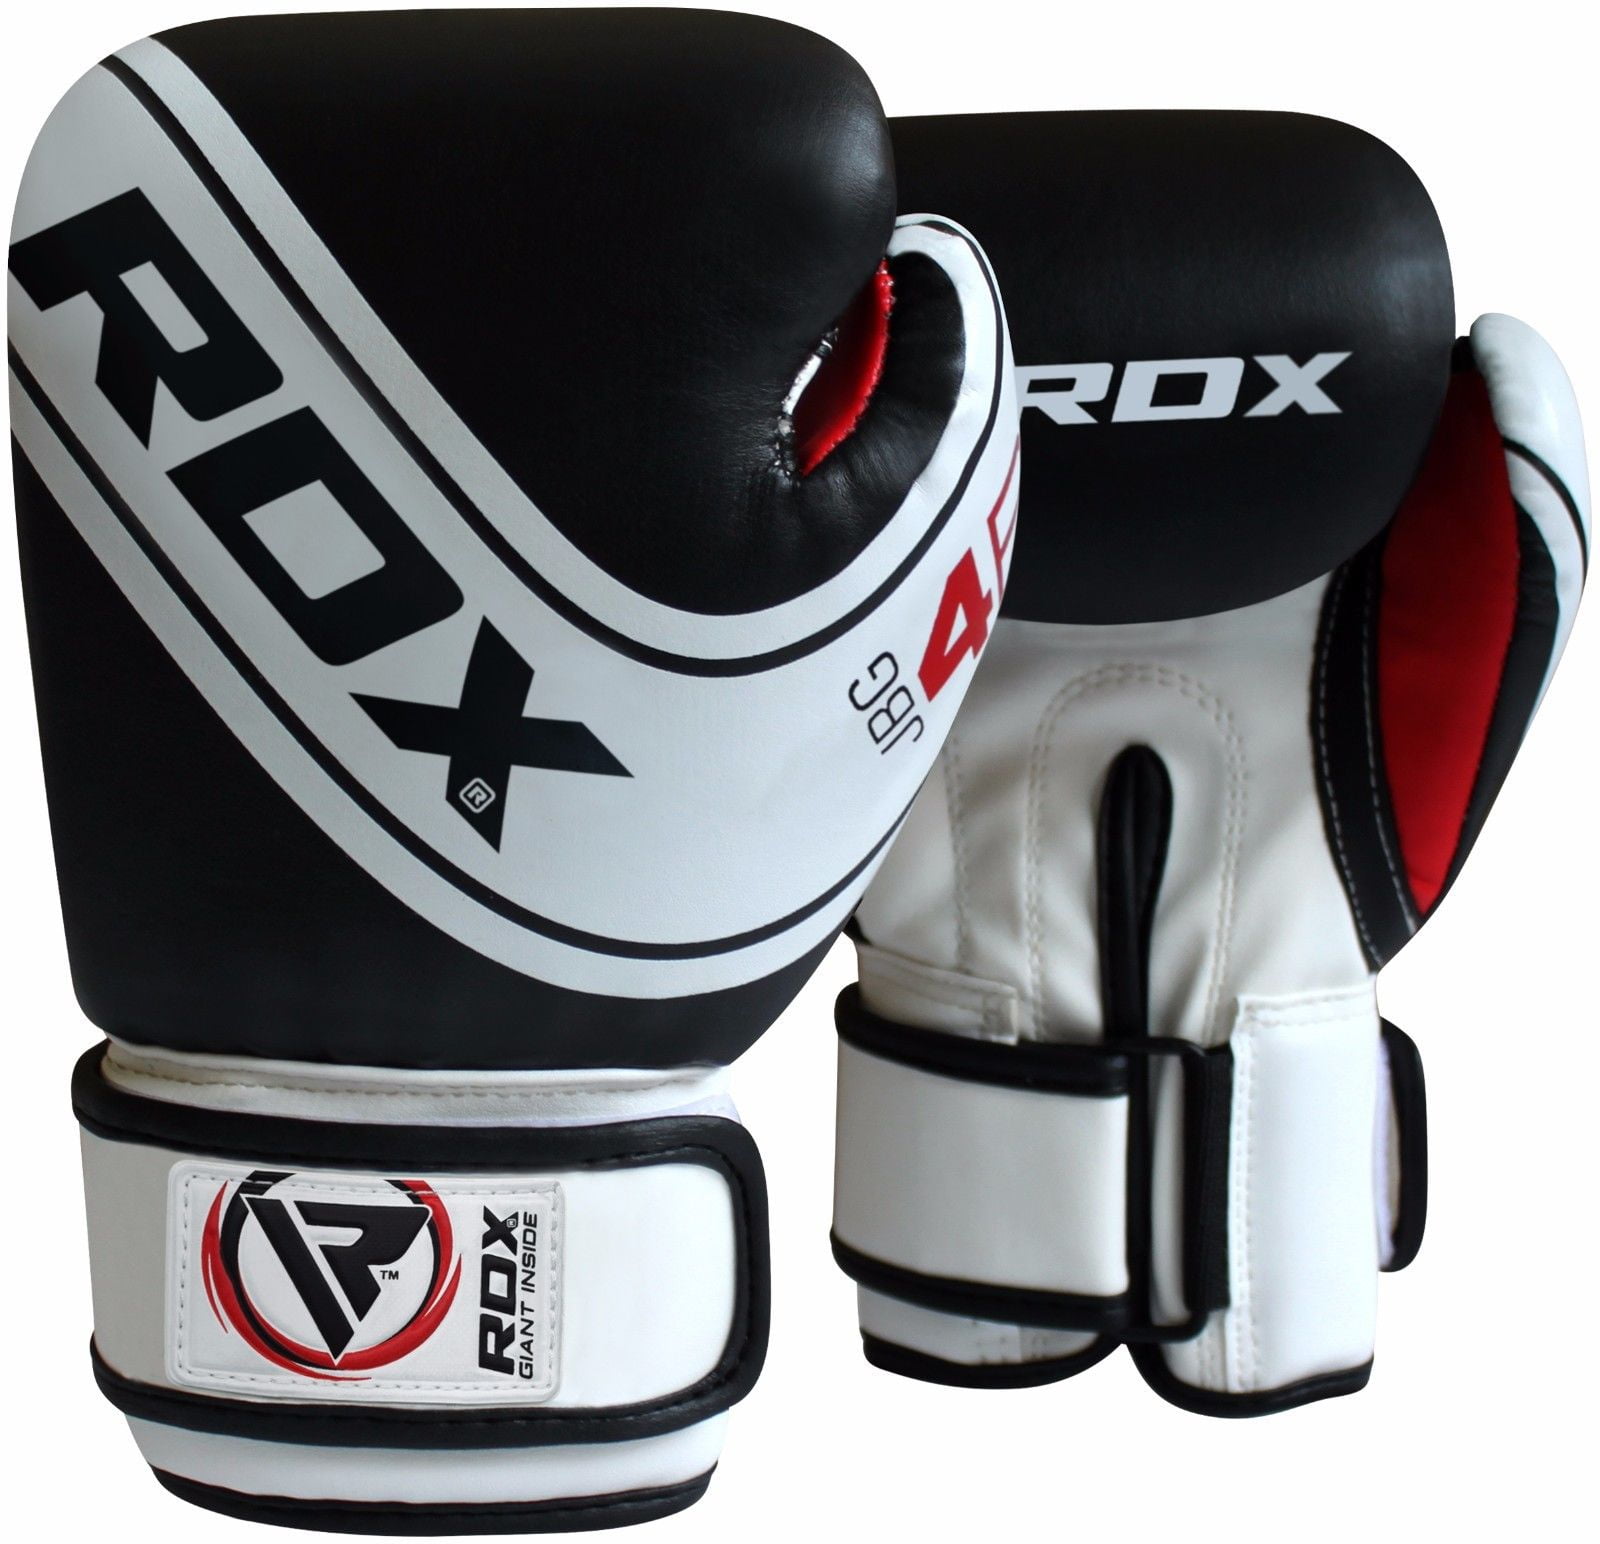 Kids Boxing Gloves Punch Bag Sparring Training Mitts MMA 4oz 6oz R A X 8oz 